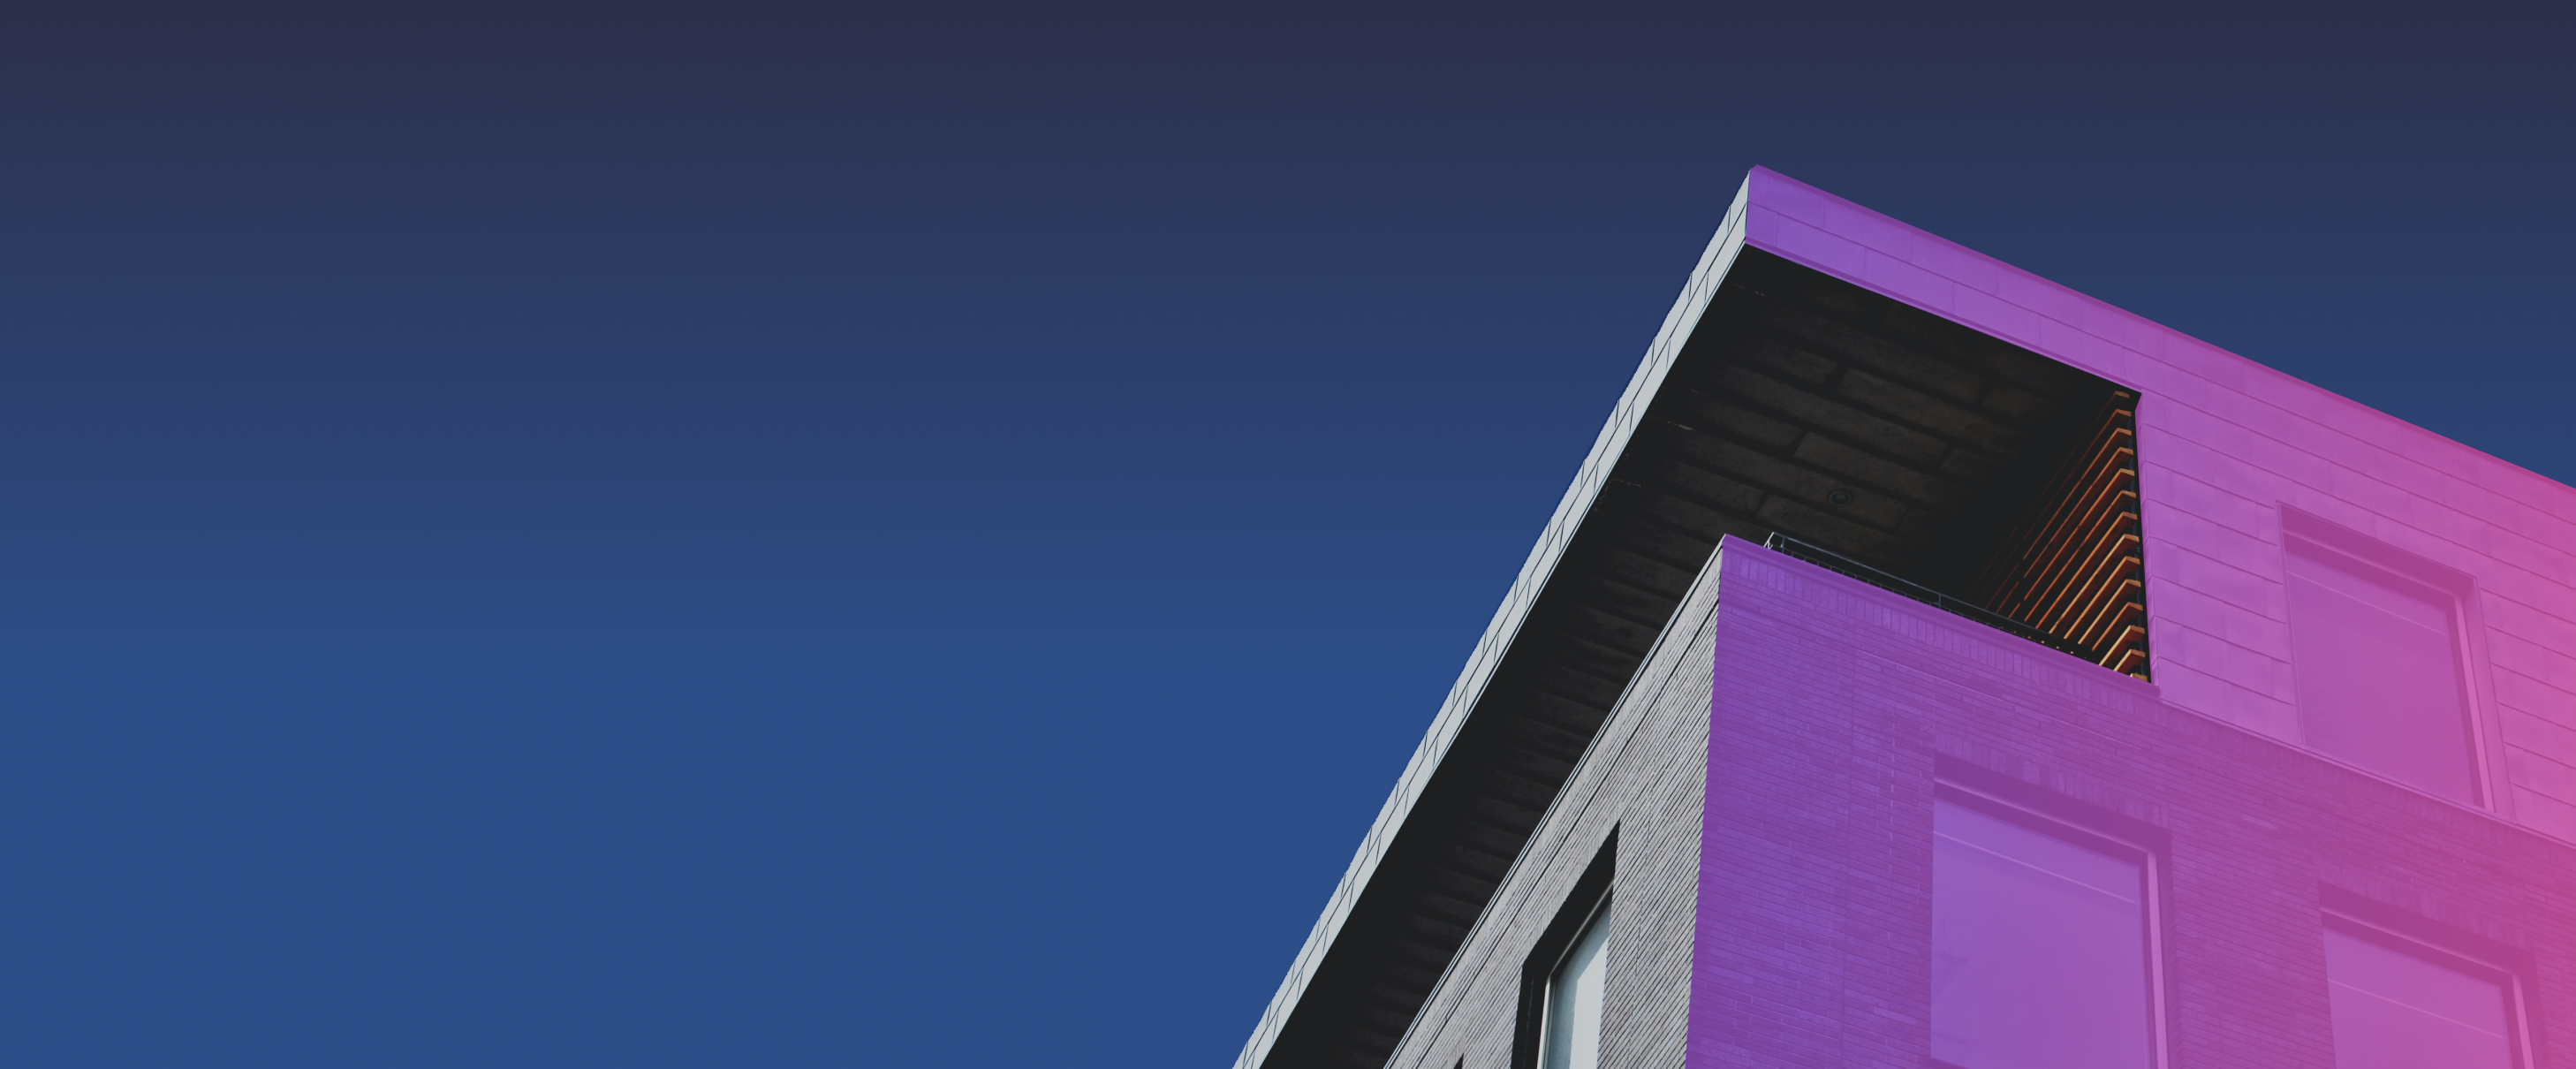 Appartment building against dark sky with one side colored in a purple and pink gradient